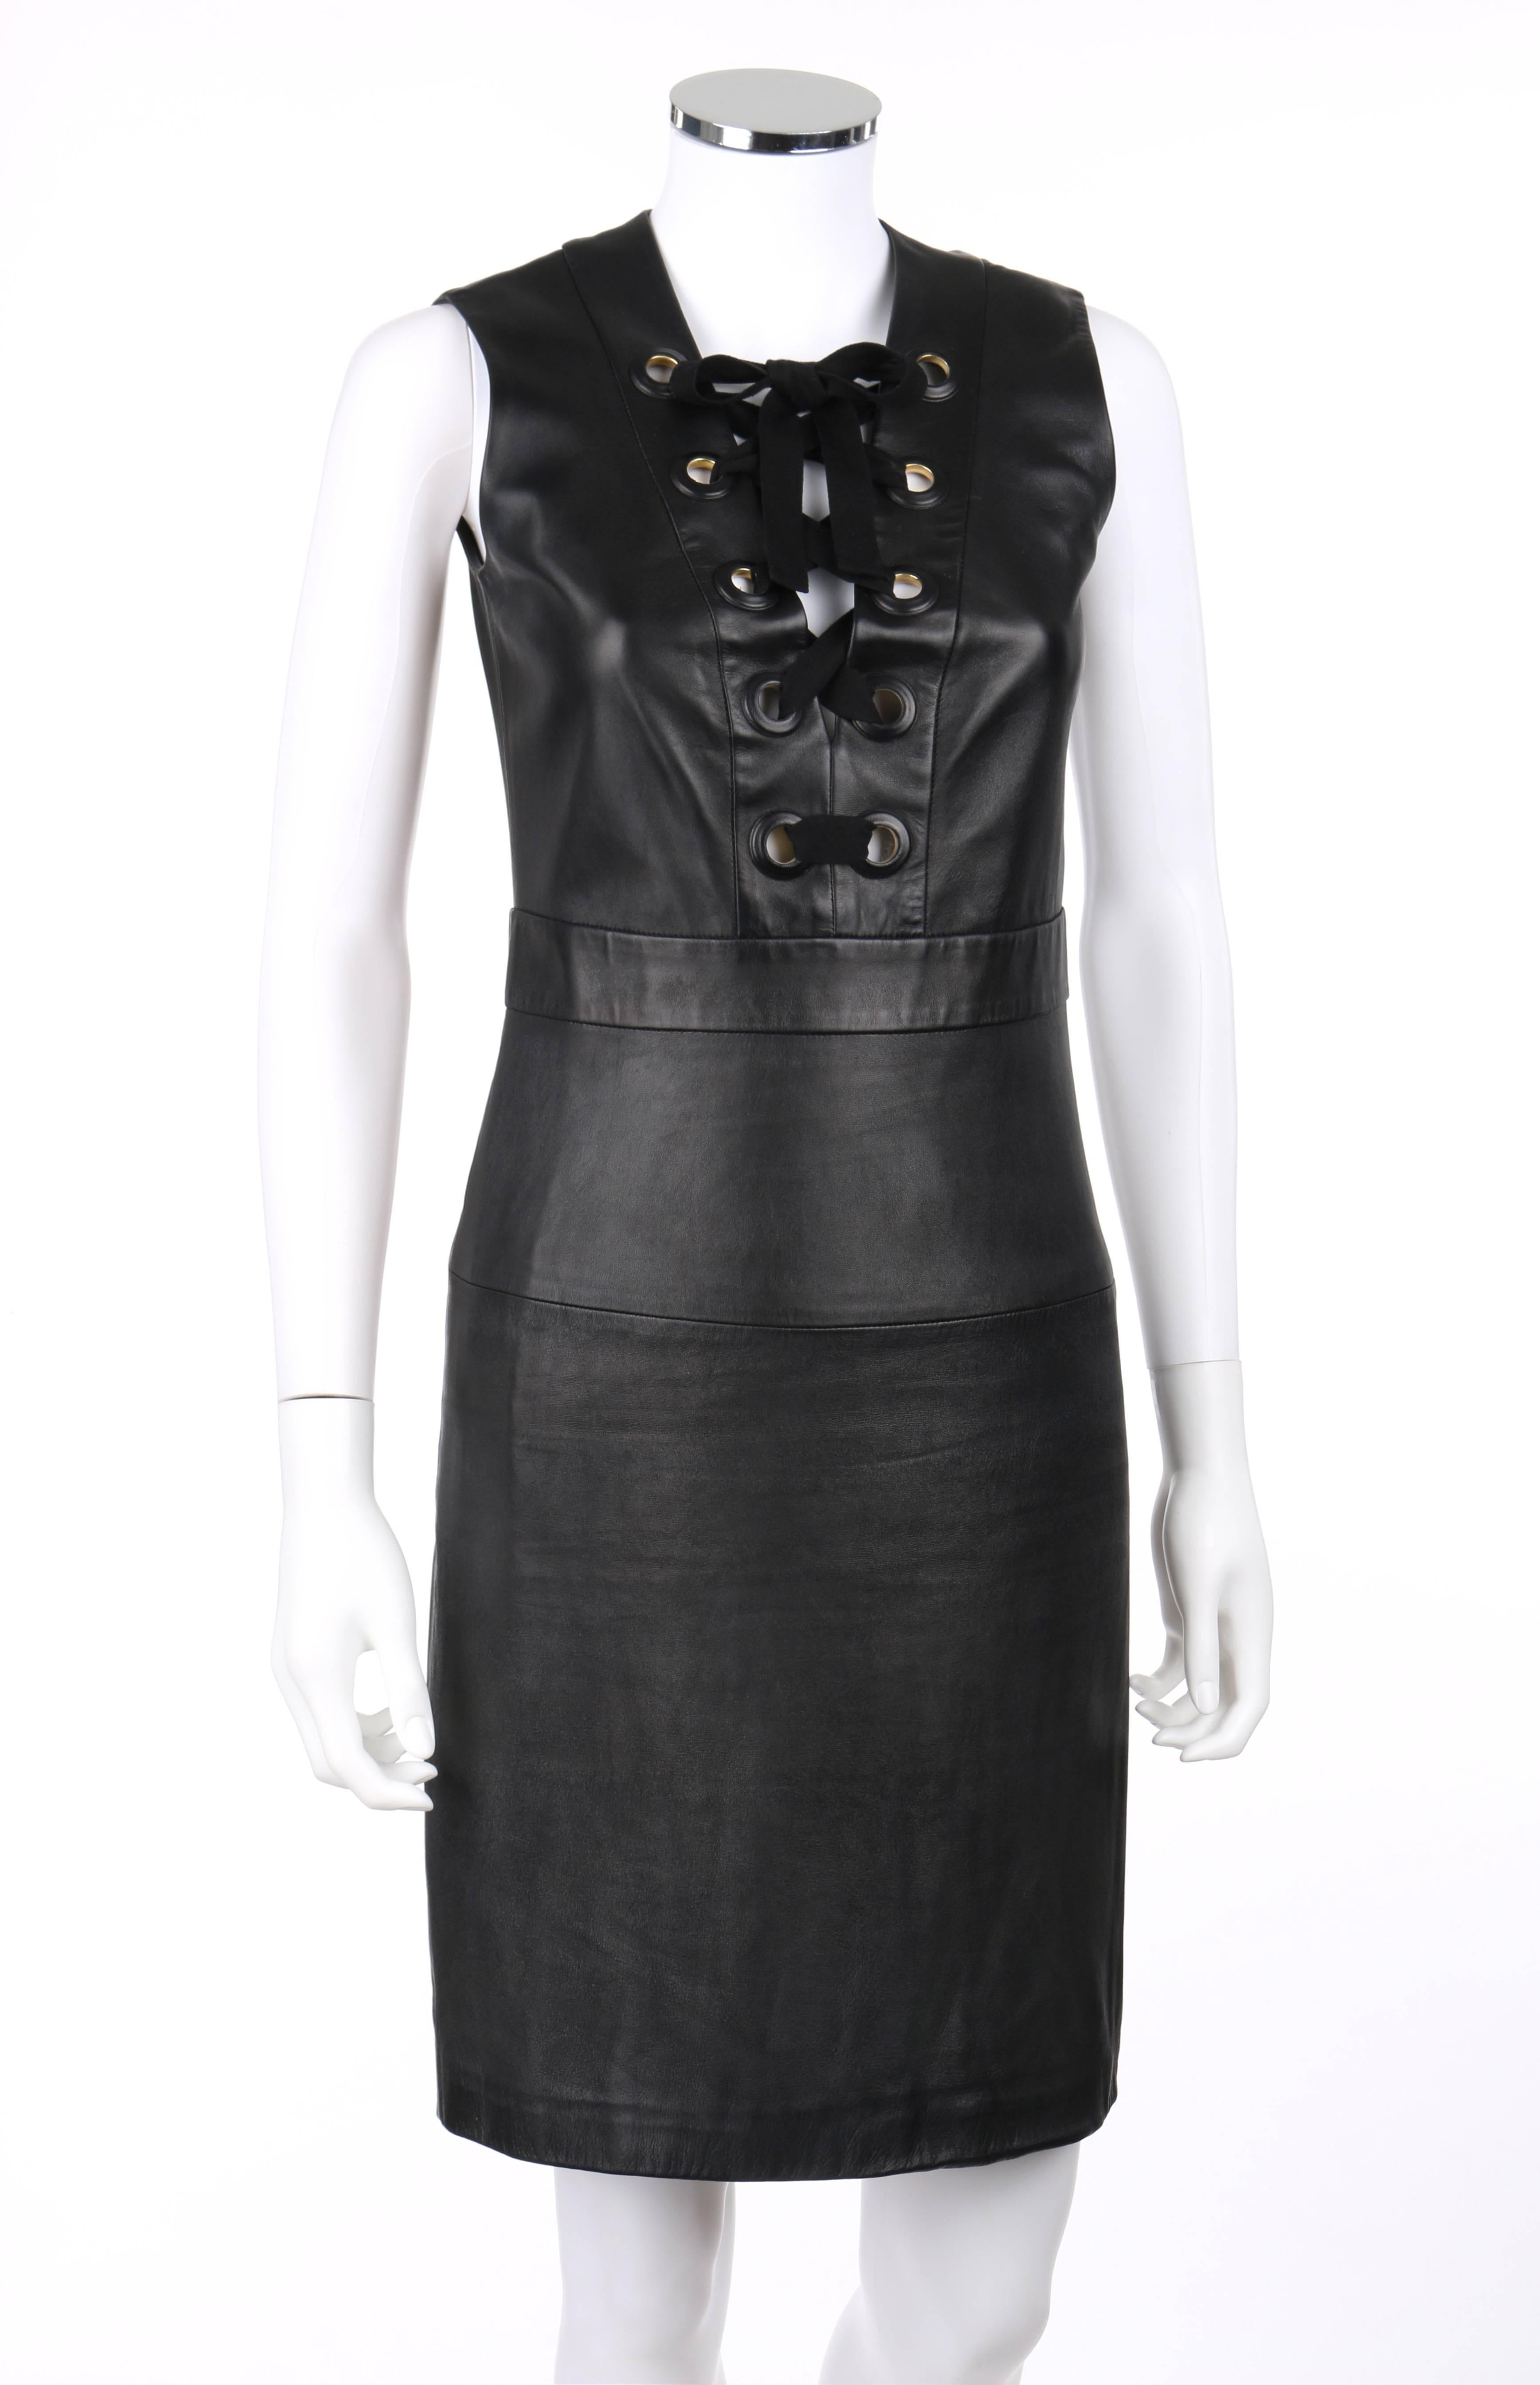 Gucci S/S 2015 black napa leather sheath dress. Deep v-neckline with black cotton twill ribbon and large leather covered grommet lace-up detail. Sleeveless. Banded waistline. Center back invisible zipper with hook and eye closure at top. Fully lined